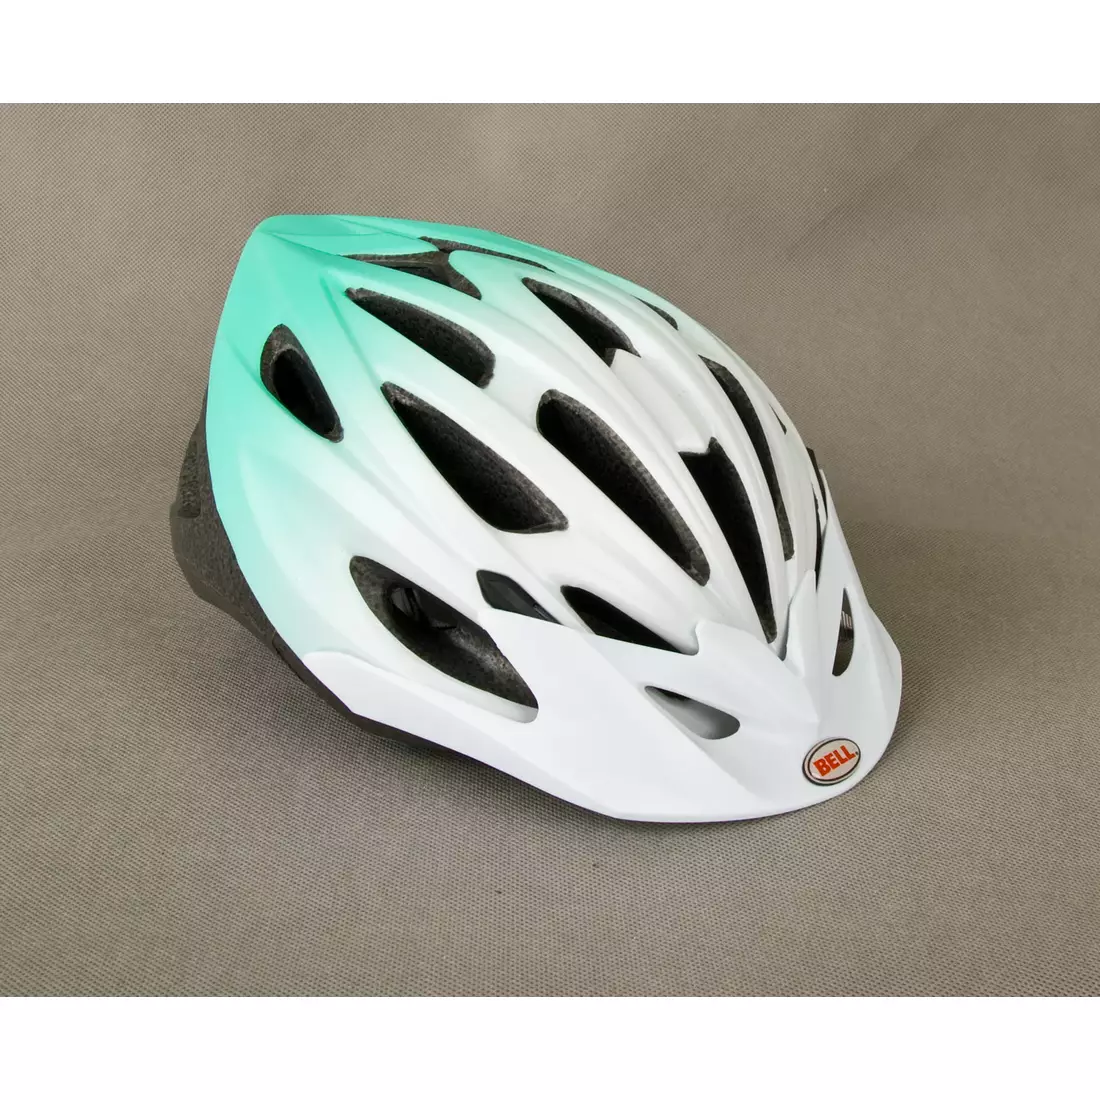 BELL SOLARA - women's bicycle helmet, white and green